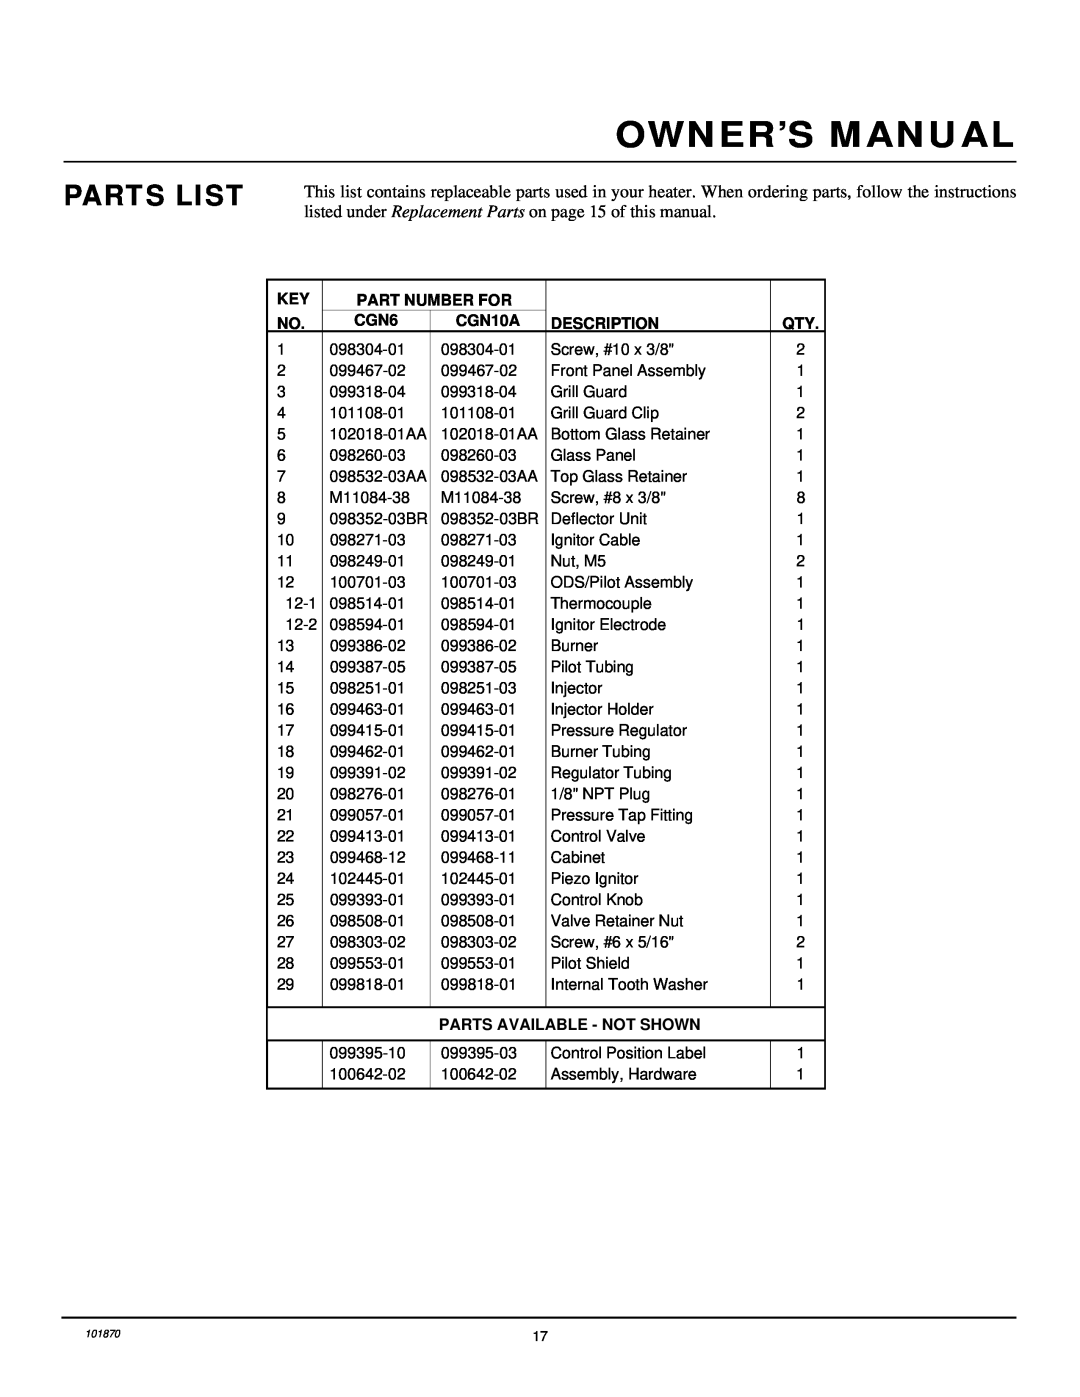 Desa CGN6 installation manual Parts List, Part Number For, CGN10A, Description, Parts Available - Not Shown 